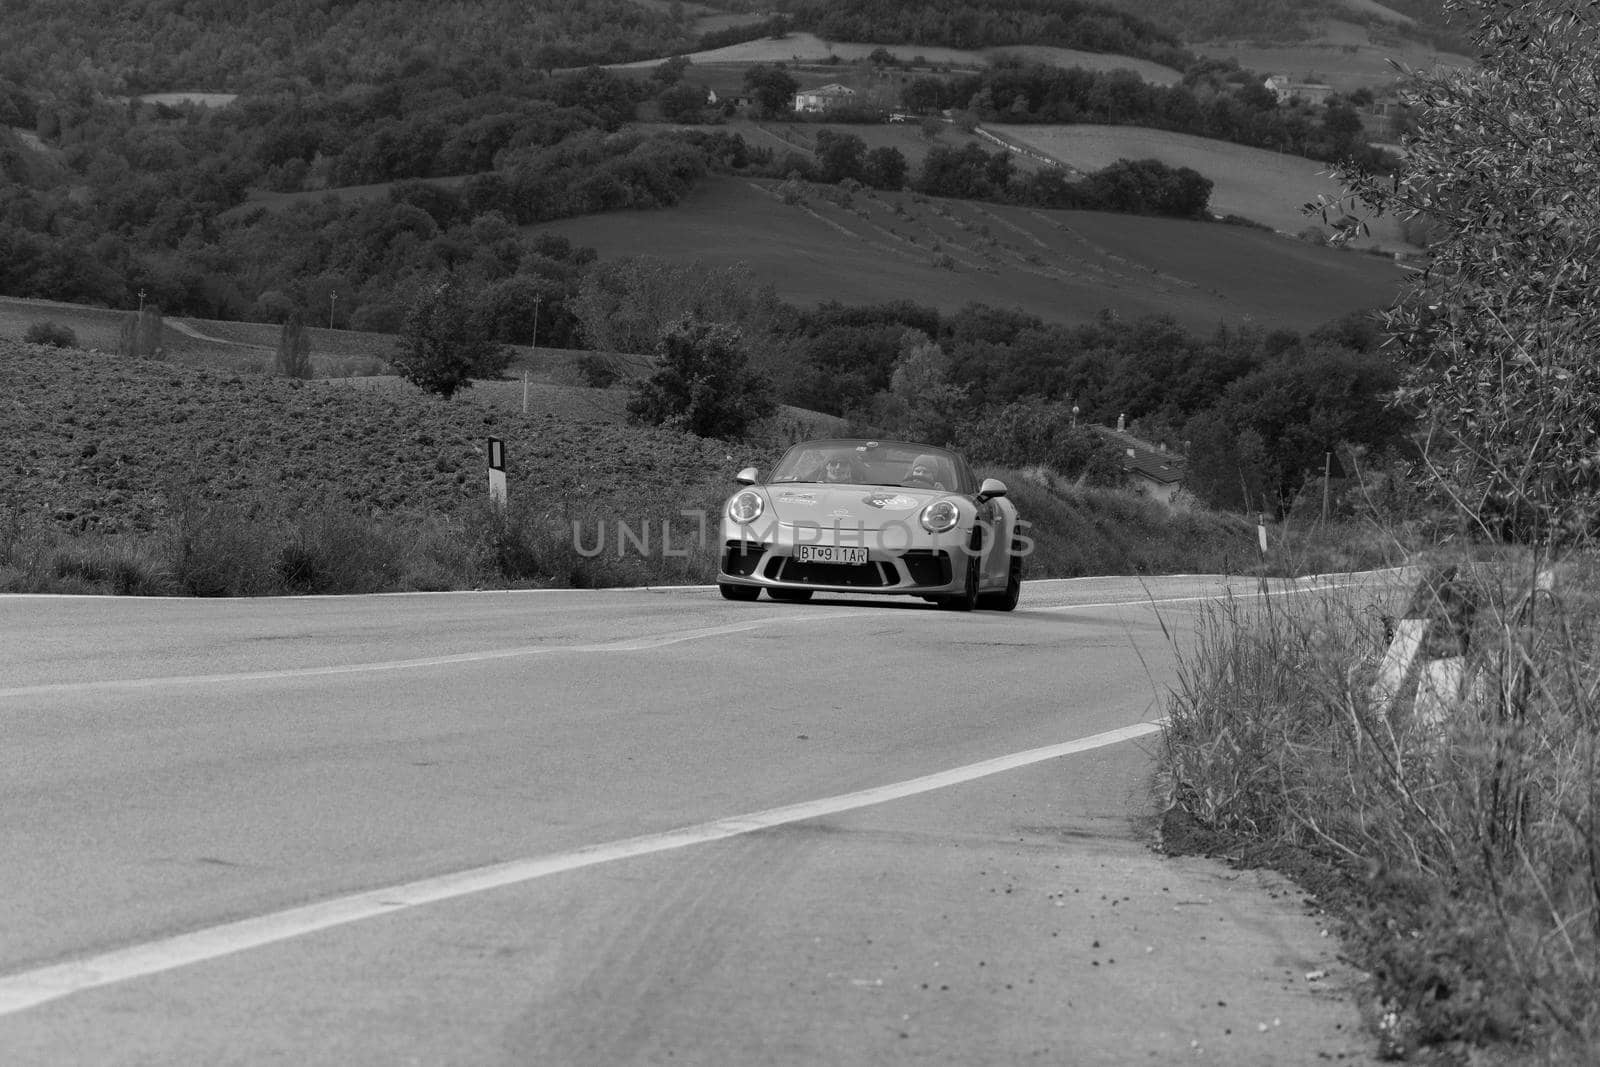 porsche 911 speedster on an old racing car in rally Mille Miglia 2020 the famous italian historical race (1927-1957 by massimocampanari